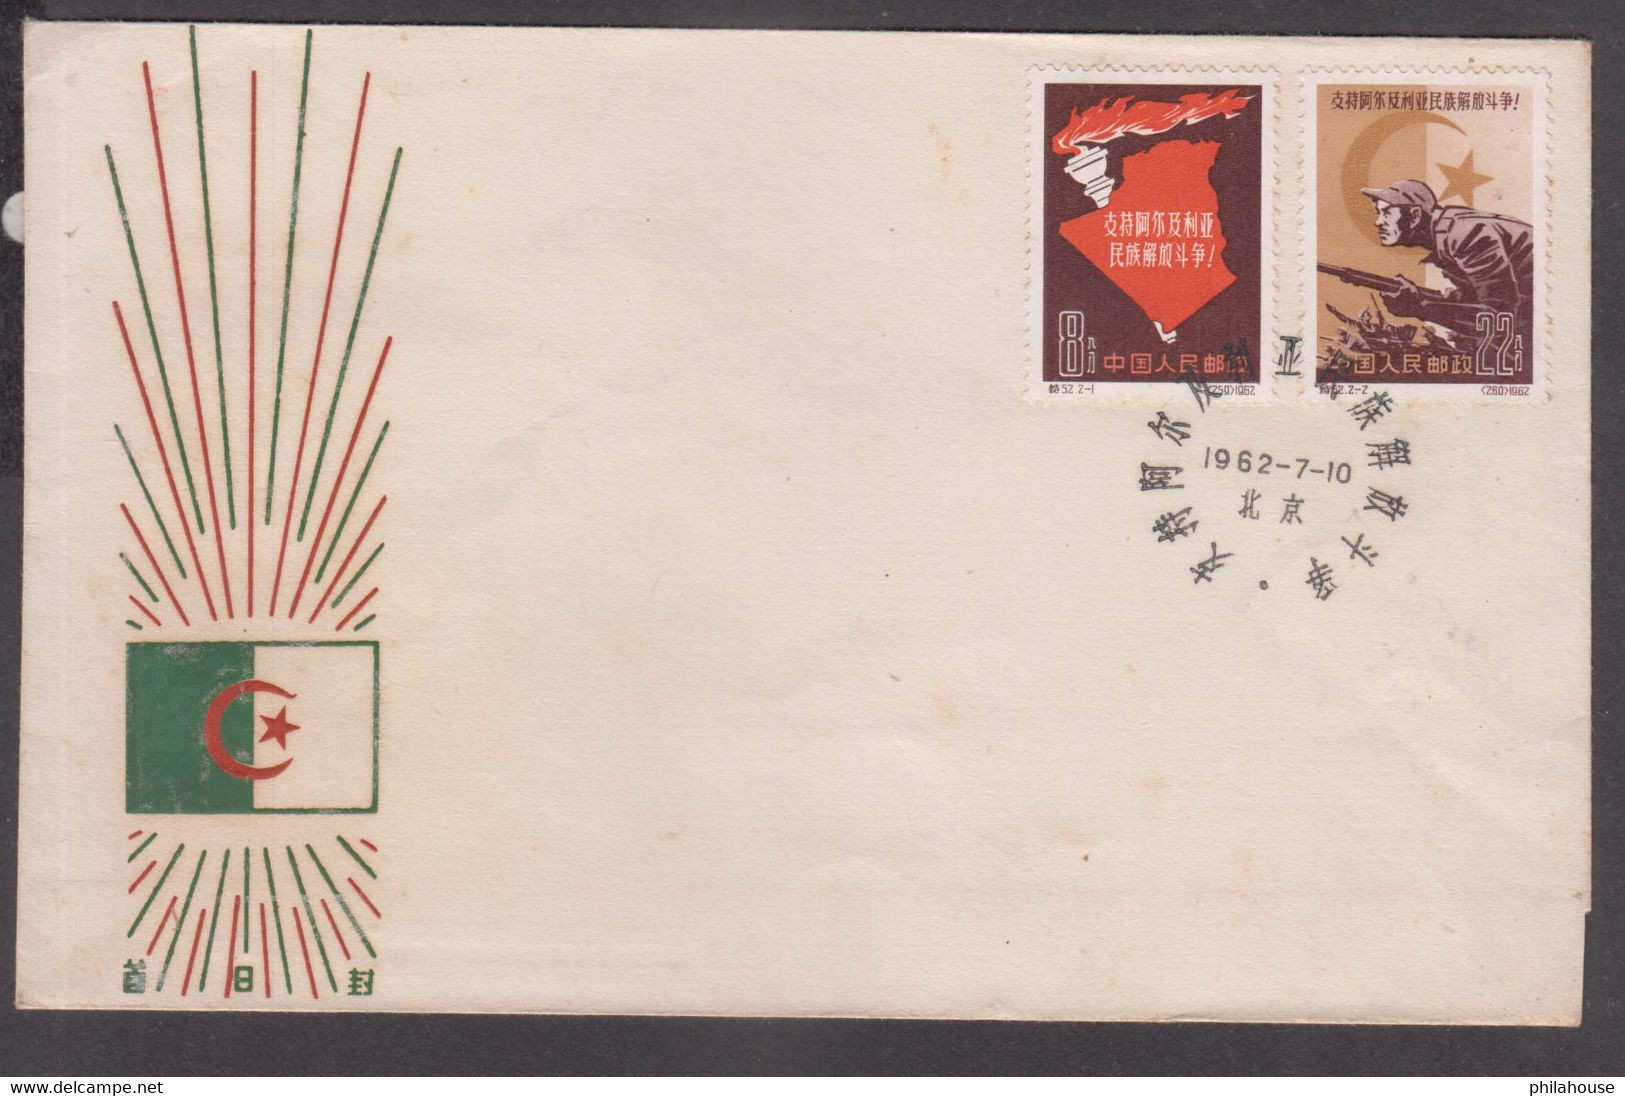 China PRC 1962 Support Algeria's Struggle For National Liberation Torch & Map Algeria FDC #P2 - Covers & Documents